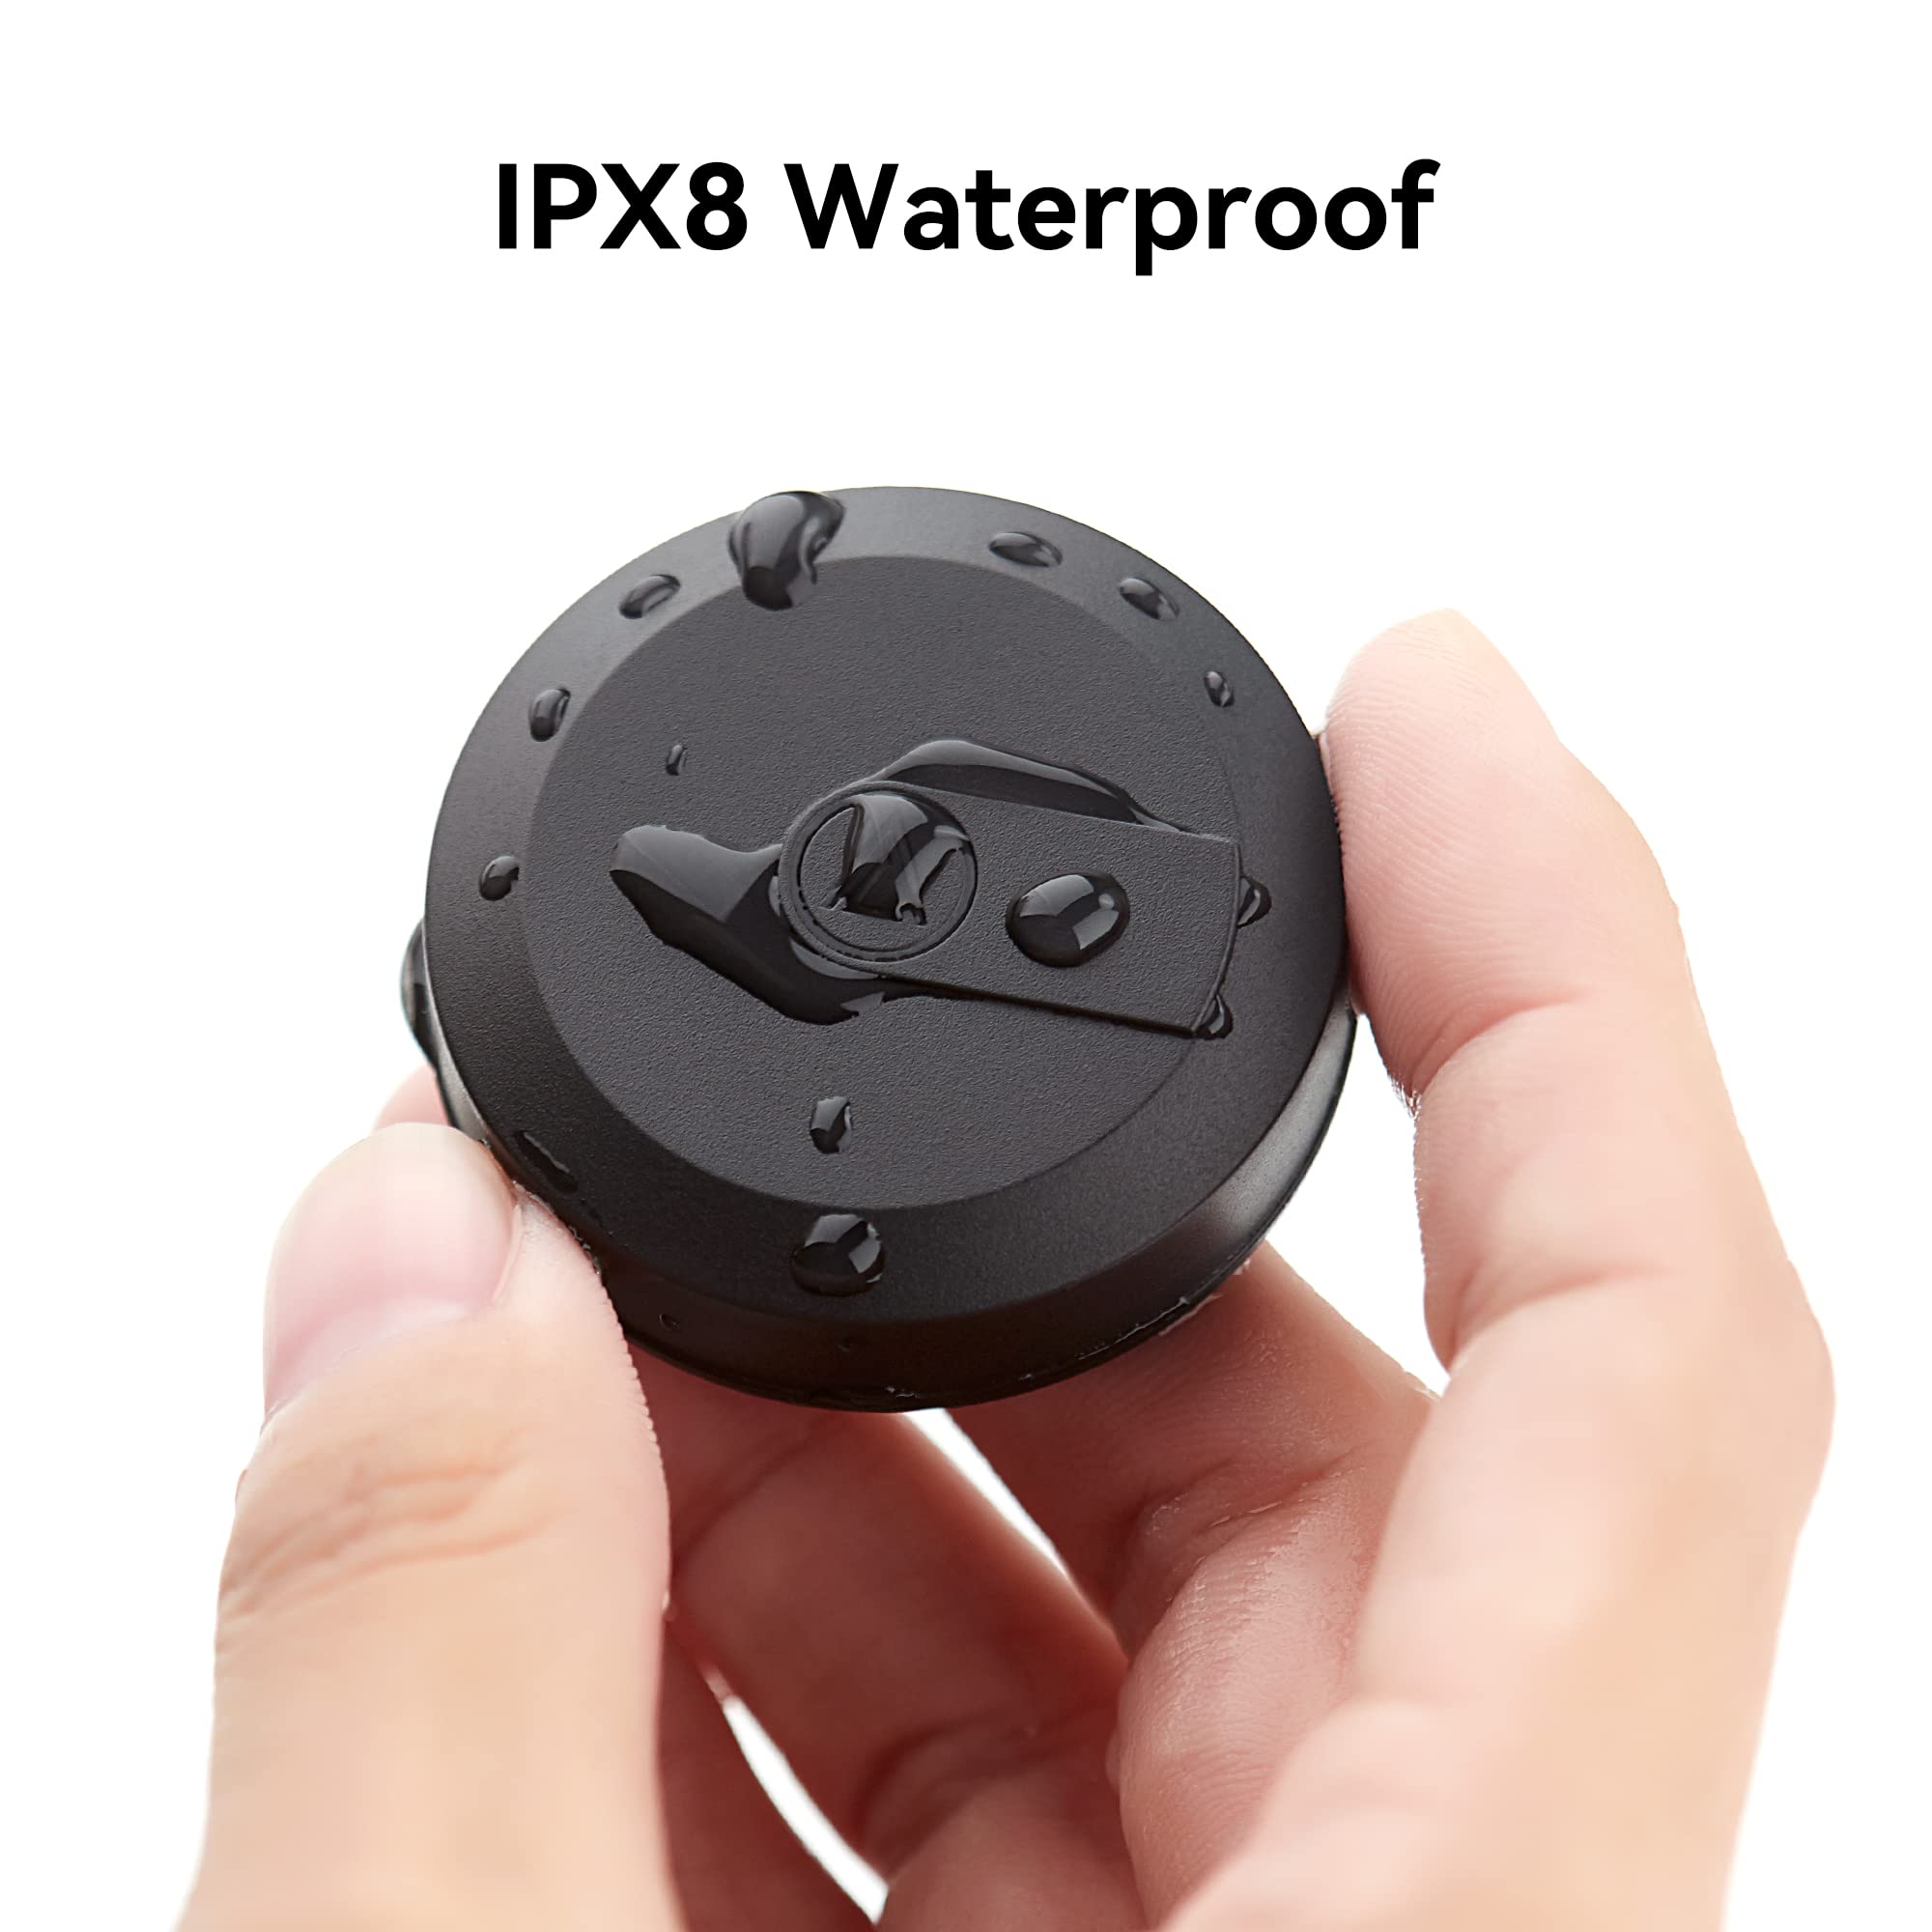 New IPX8 Waterproof AirTag Holder/Case with 3M Adhesive Sticker [4 Pack] Compatible with Apple Airtag Air Tags Stick Cover for Luggage Bike Laptop Remote Drone Camera Hidden